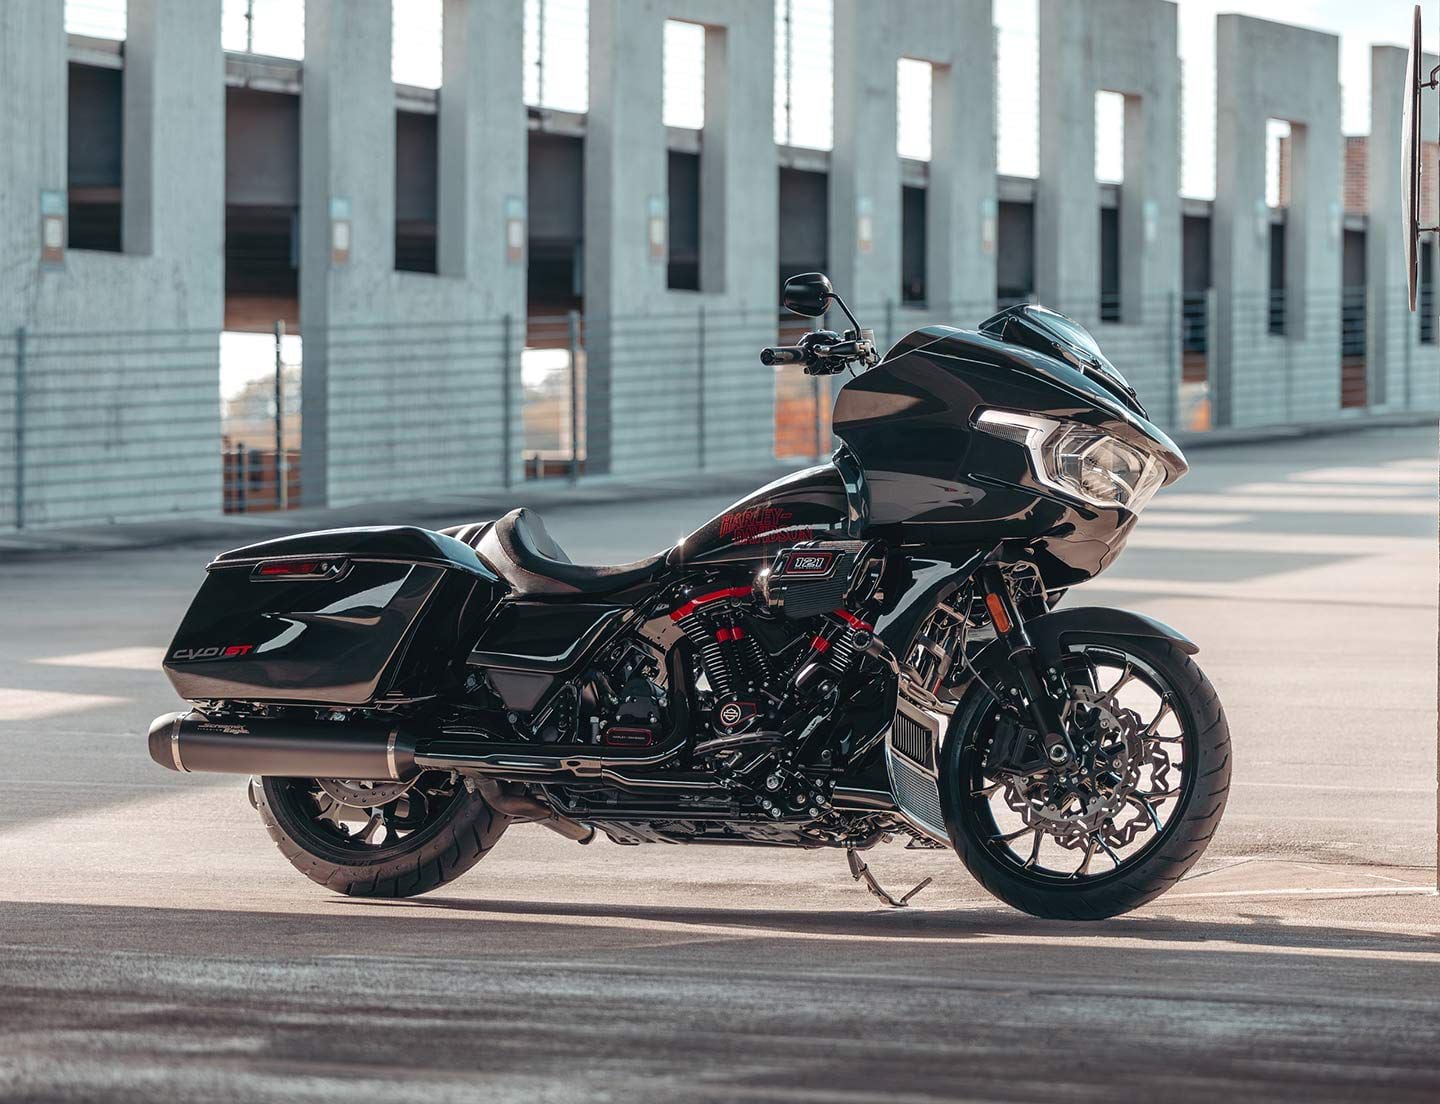 Harley celebrates the CVO program’s 25th anniversary with the release of the new 2024 CVO Road Glide ST performance bagger.